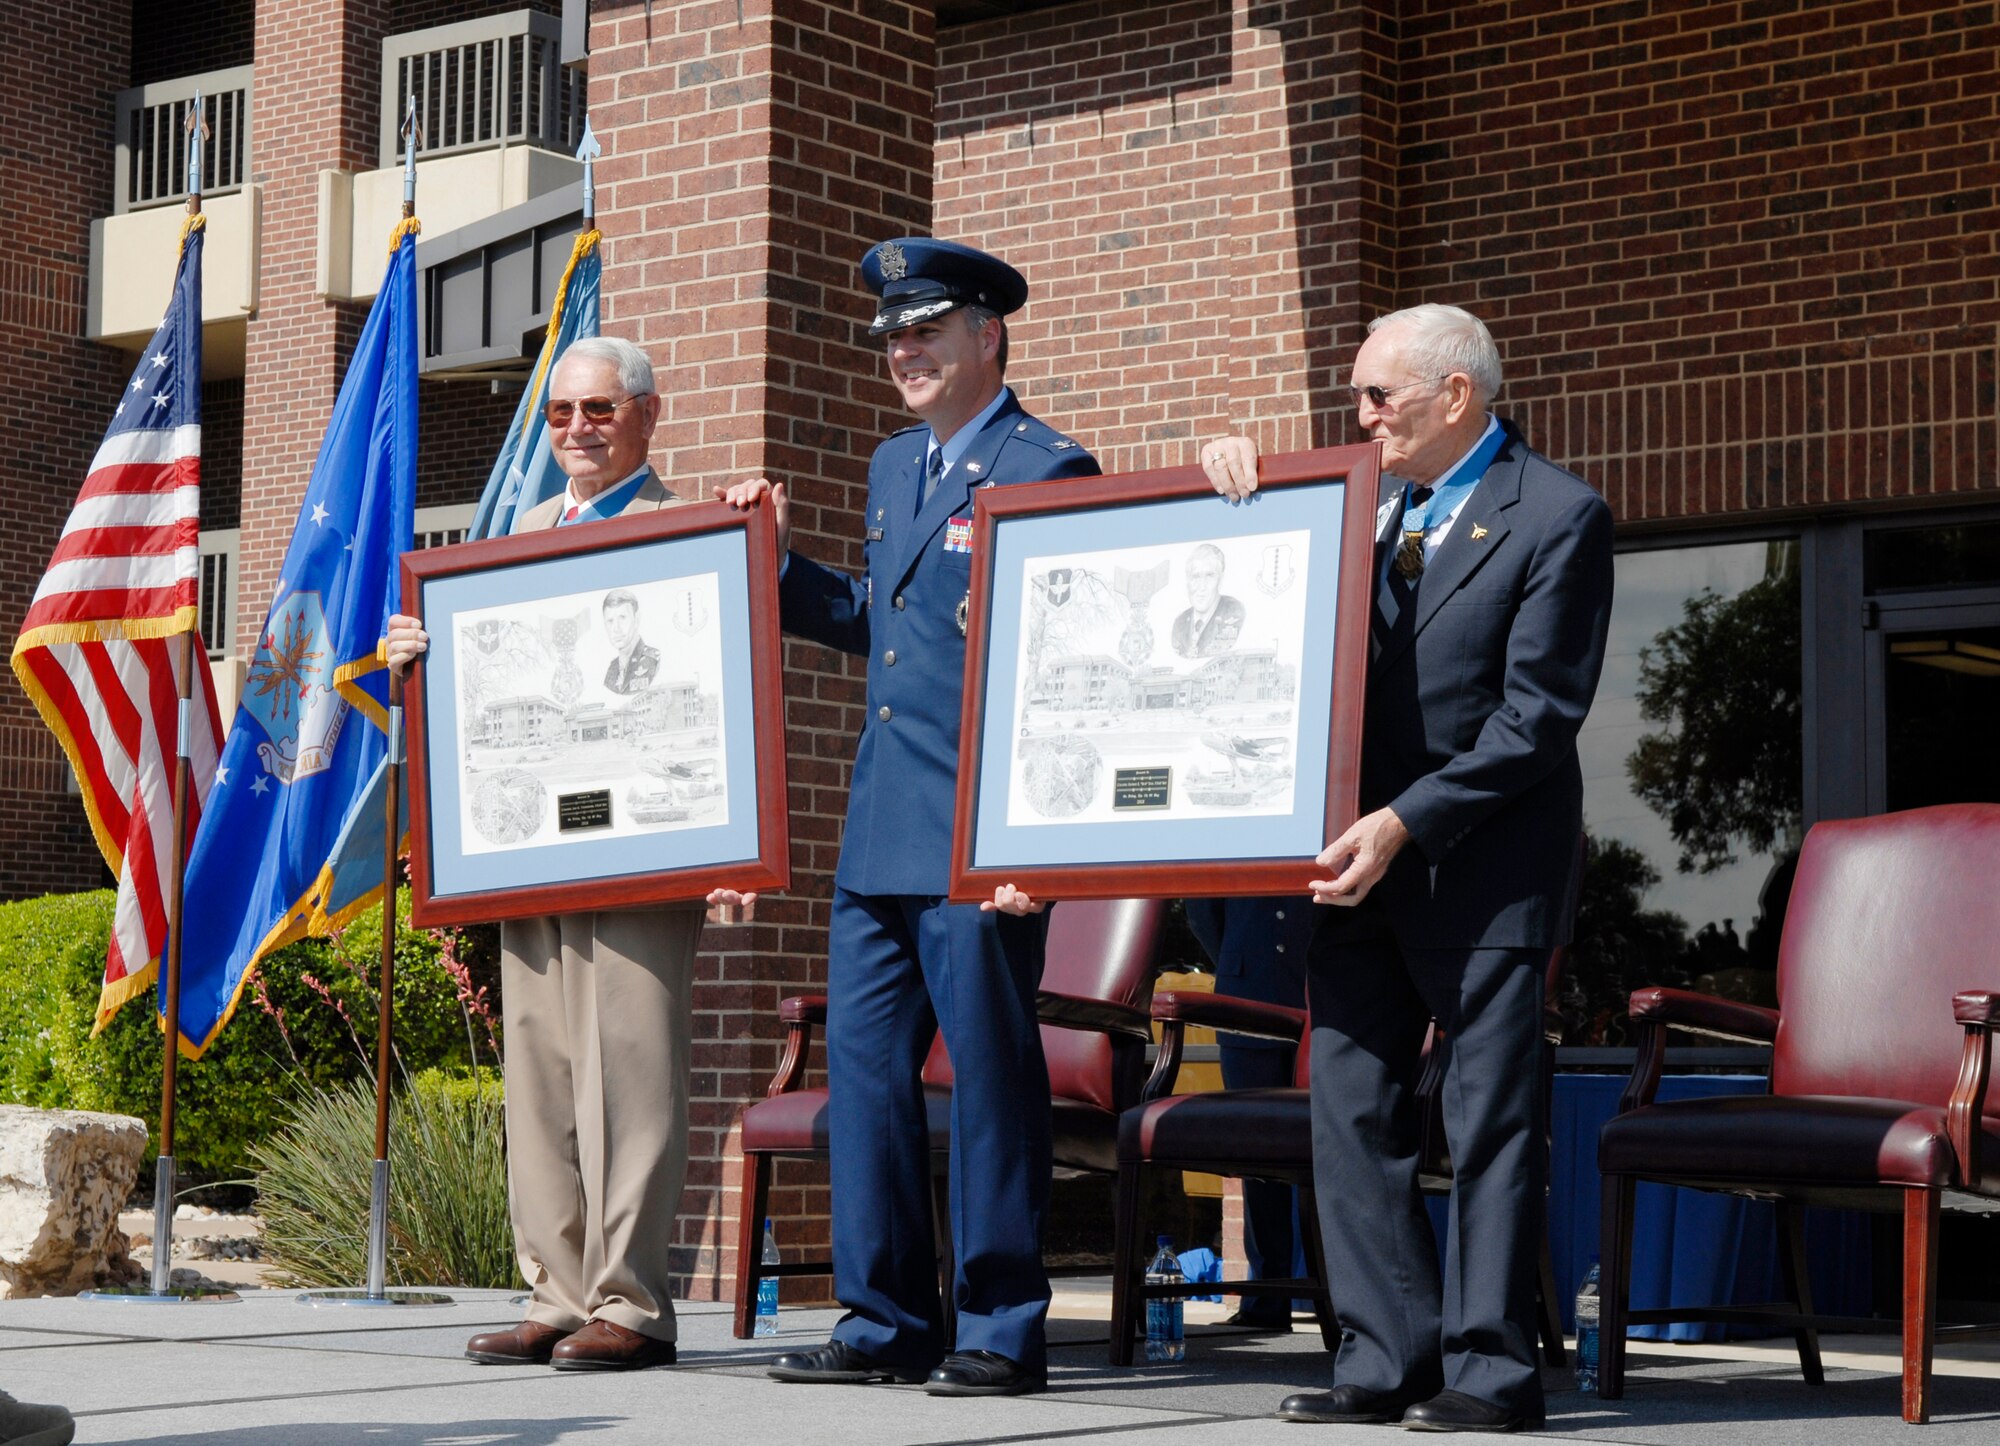 GOODFELLOW AIR FORCE BASE, Texas – Retired Air Force Cols. Leo K. Thorsness and George E. “Bud” Day are presented lithographs by Colonel Thomas Geary, 17th Training Wing commander, May 7, 2010. Two Visiting Officer Quarters were named in honor of Colonels Day and Thorsness, both of whom received the Medal of Honor for actions while serving in Vietnam. (U.S. Air Force photo/Lou Czarnecki)